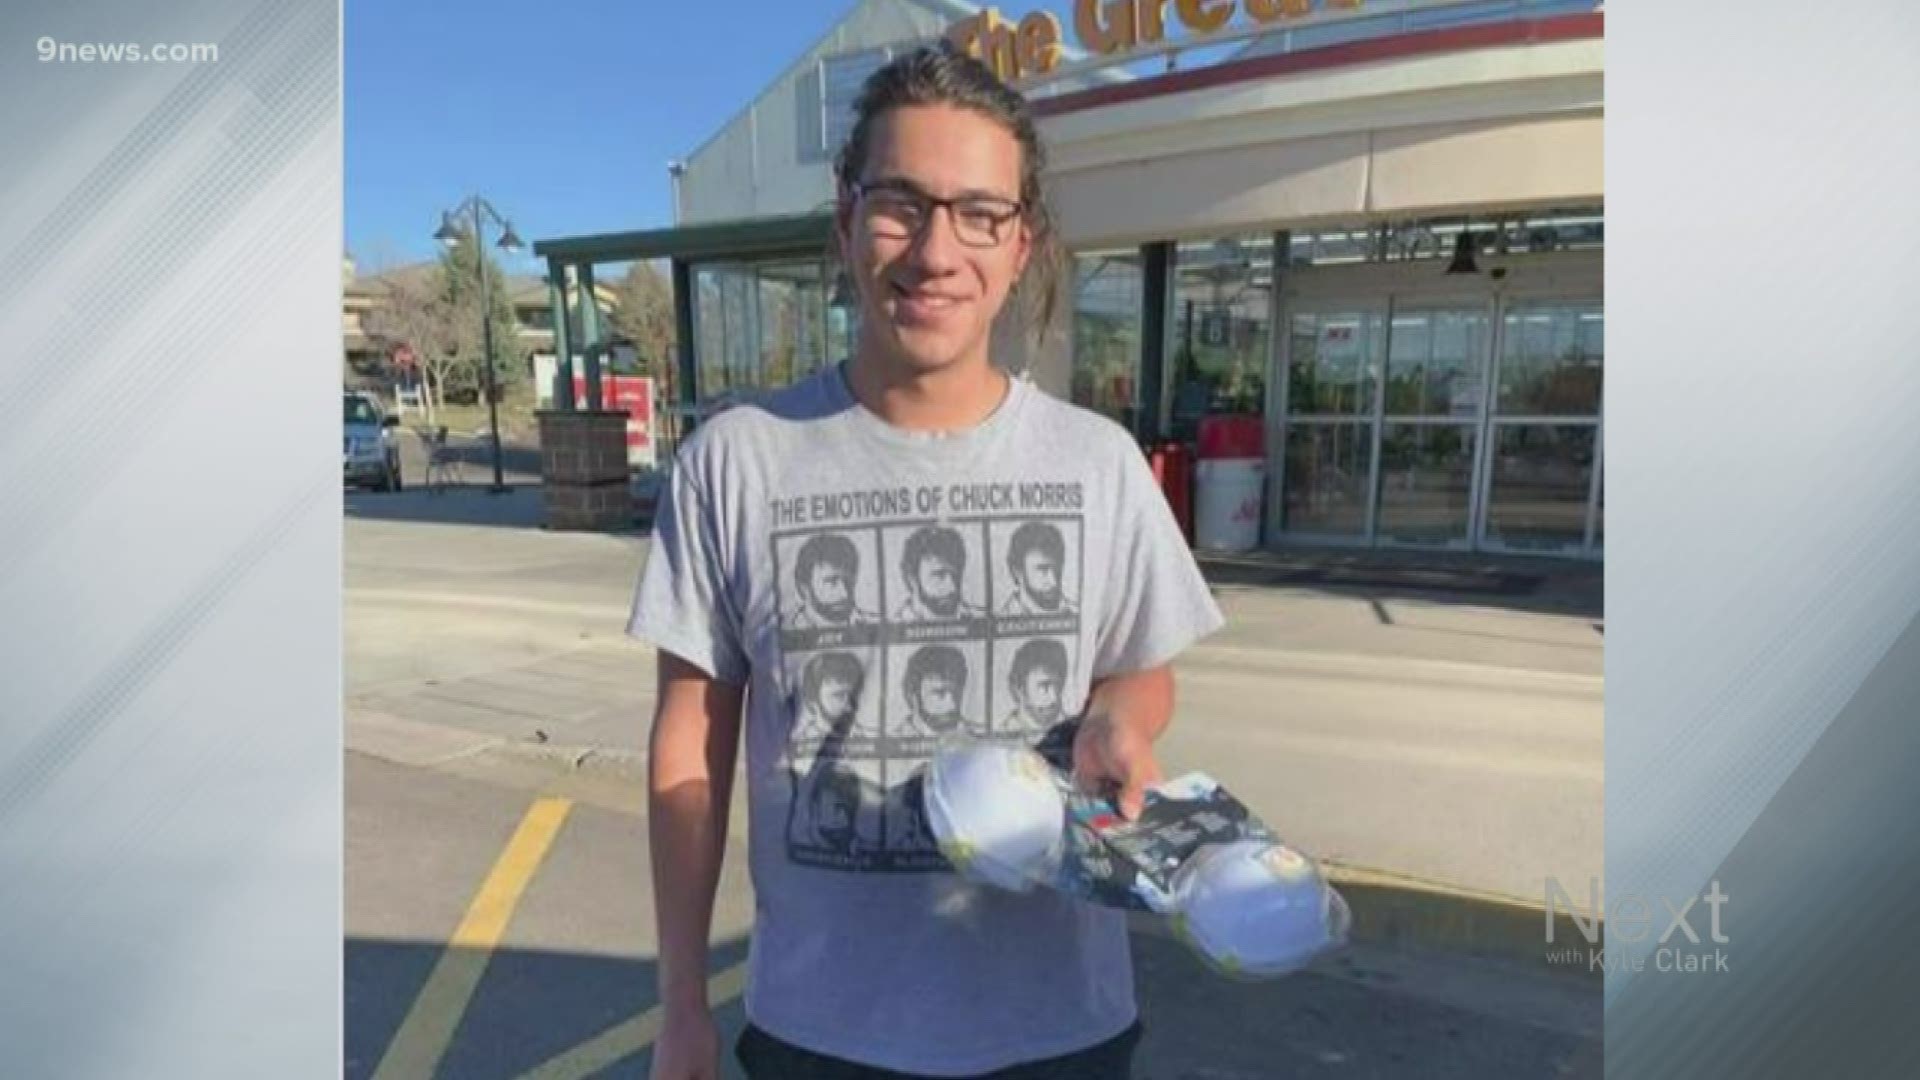 An Ace hardware employee gave a Colorado doctor his personal N95 masks when his store was sold out.